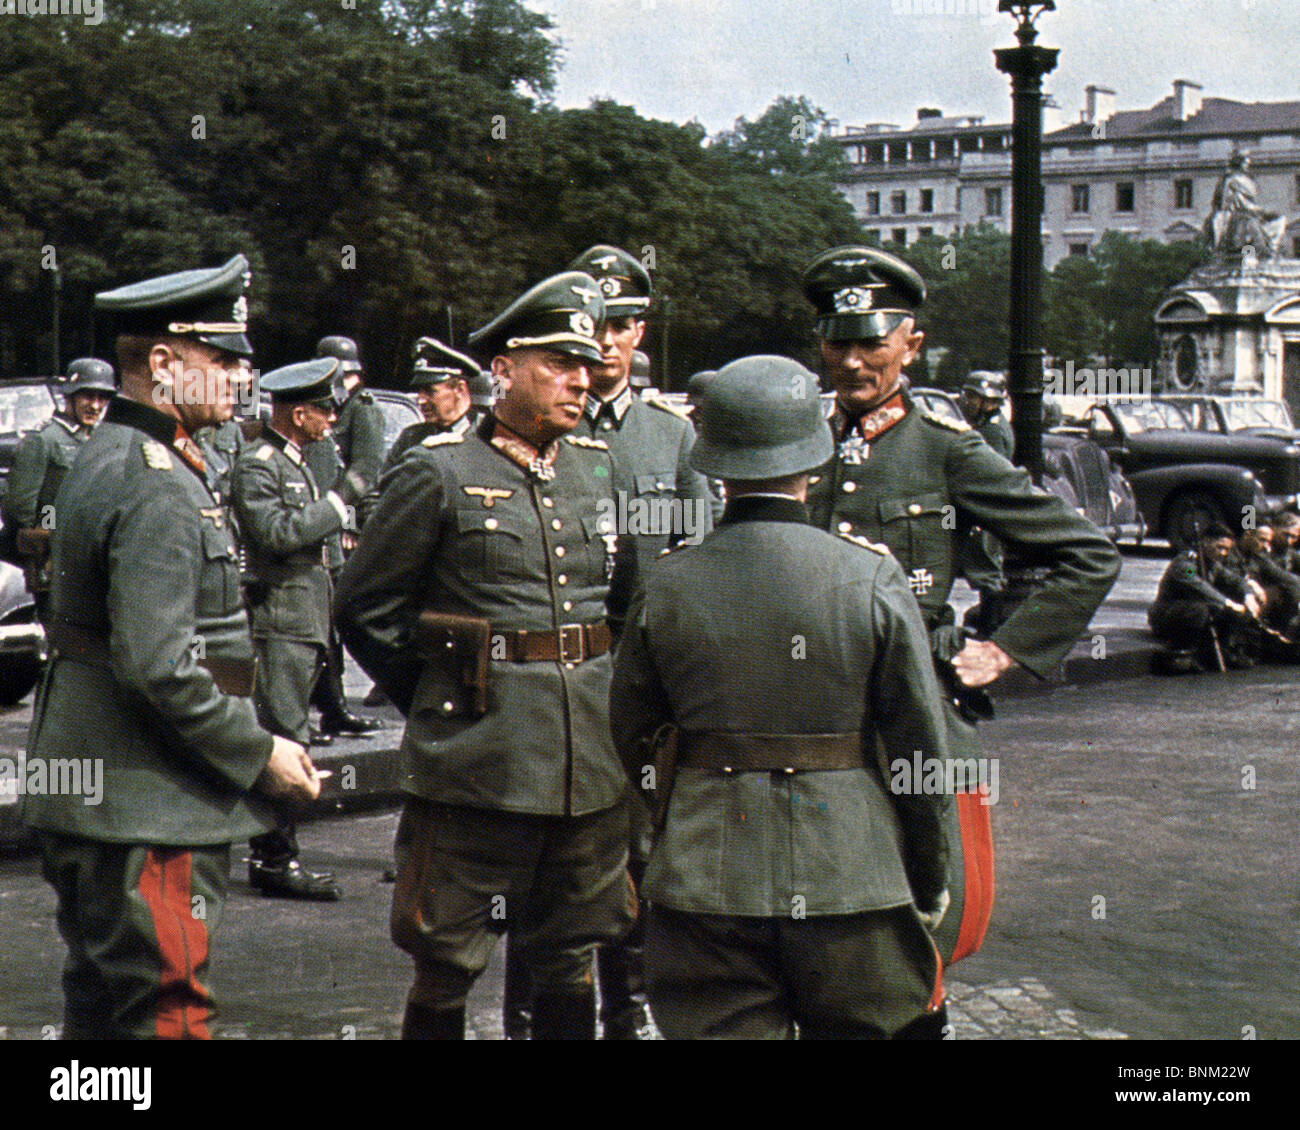 FIELD MARSHALL FEDOR von BOCK at right with other Nazi officers in Paris, June 1940 Stock Photo